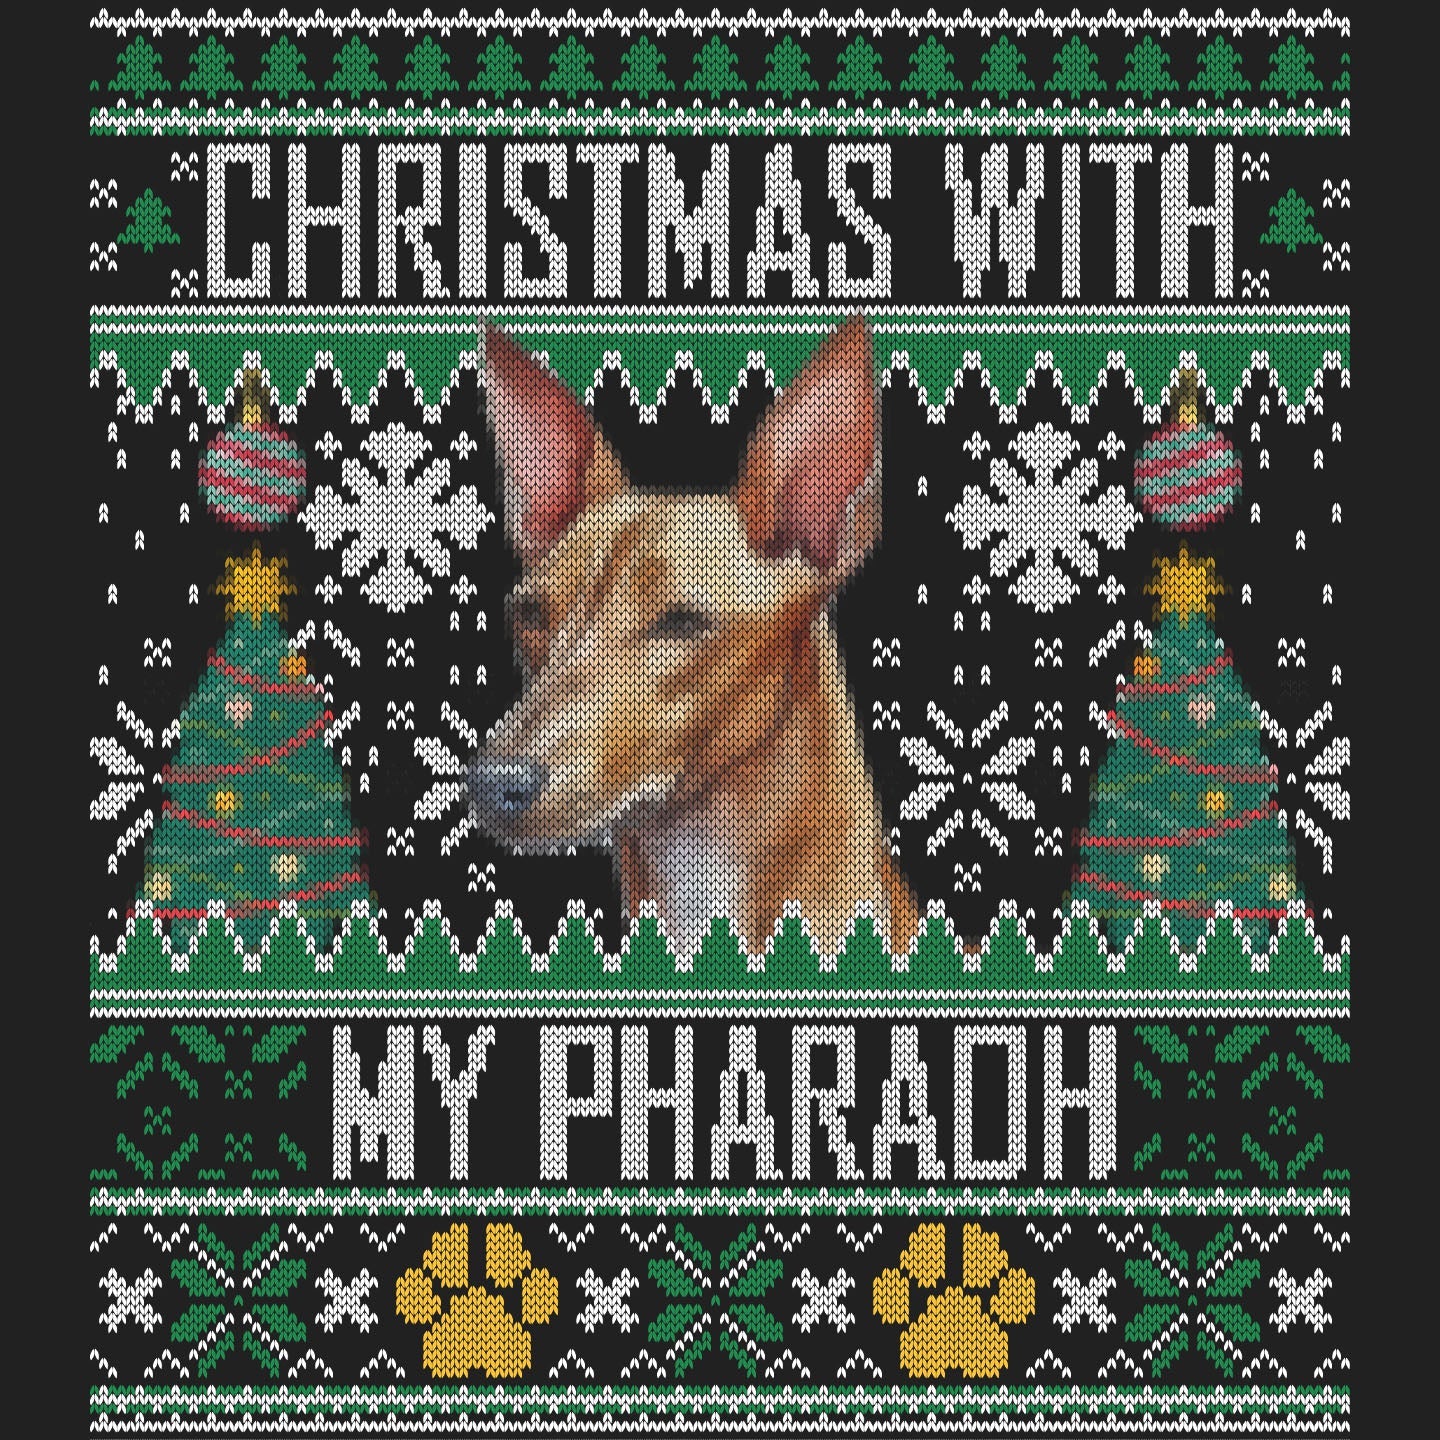 Ugly Sweater Christmas with My Pharaoh Hound - Women's V-Neck Long Sleeve T-Shirt